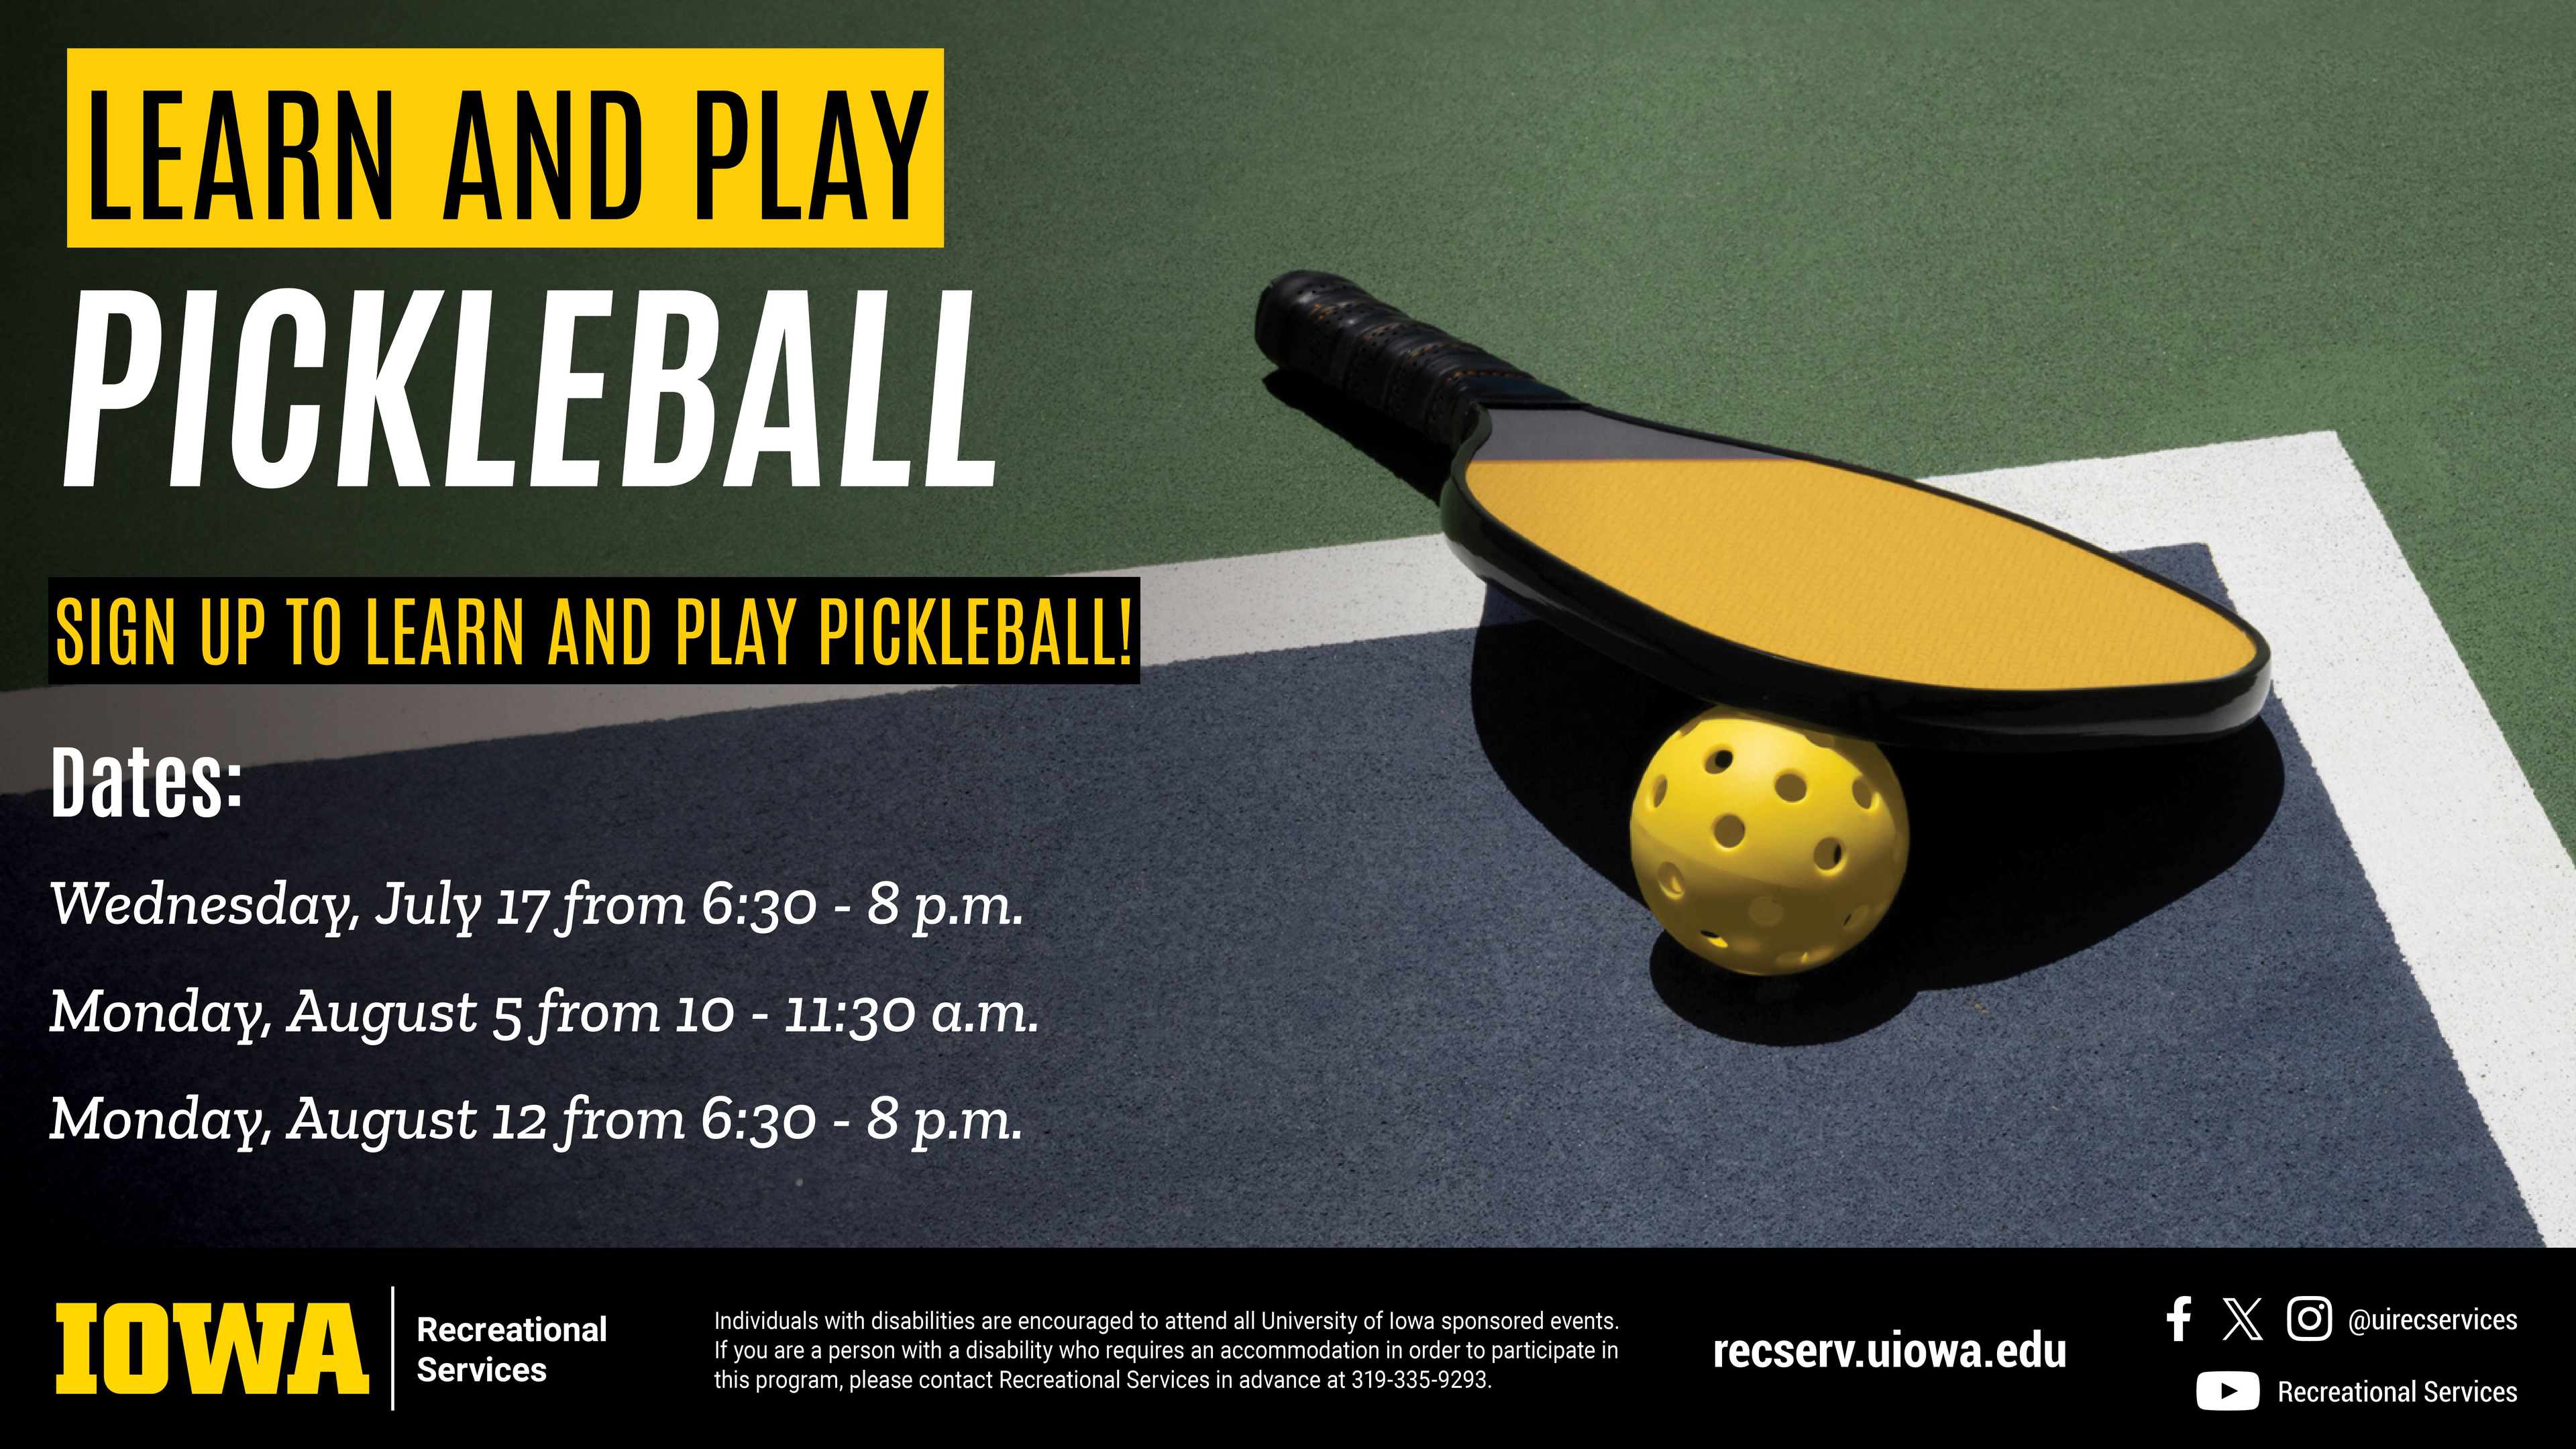 Learn at play pickleball at the HTRC